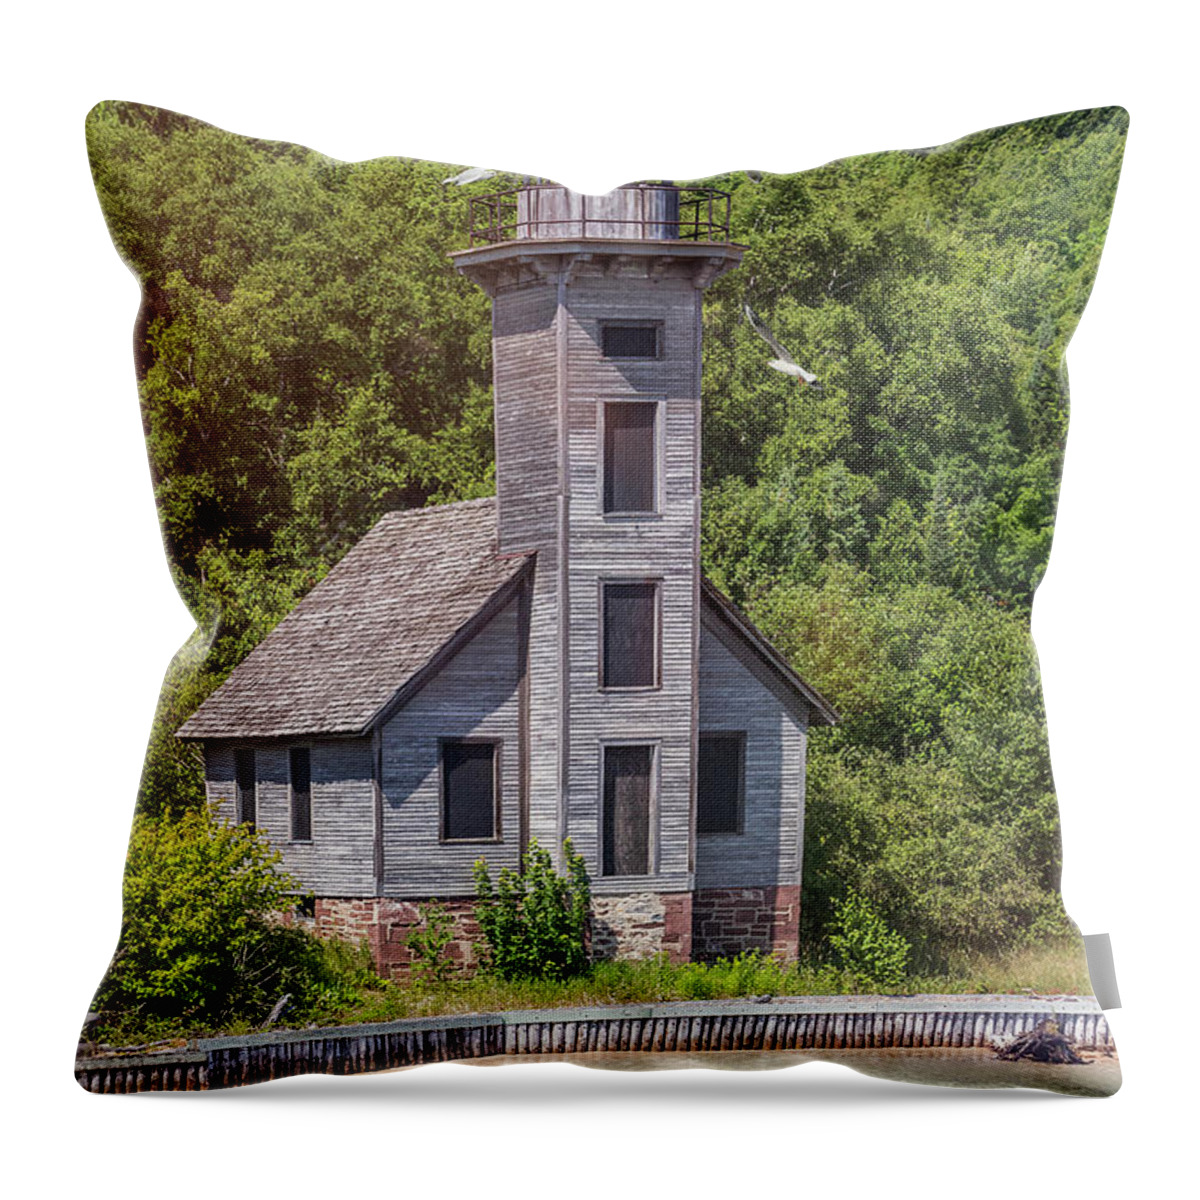 Channel Lighthouse Throw Pillow featuring the photograph Channel Lighthouse, Michigan by Patti Deters